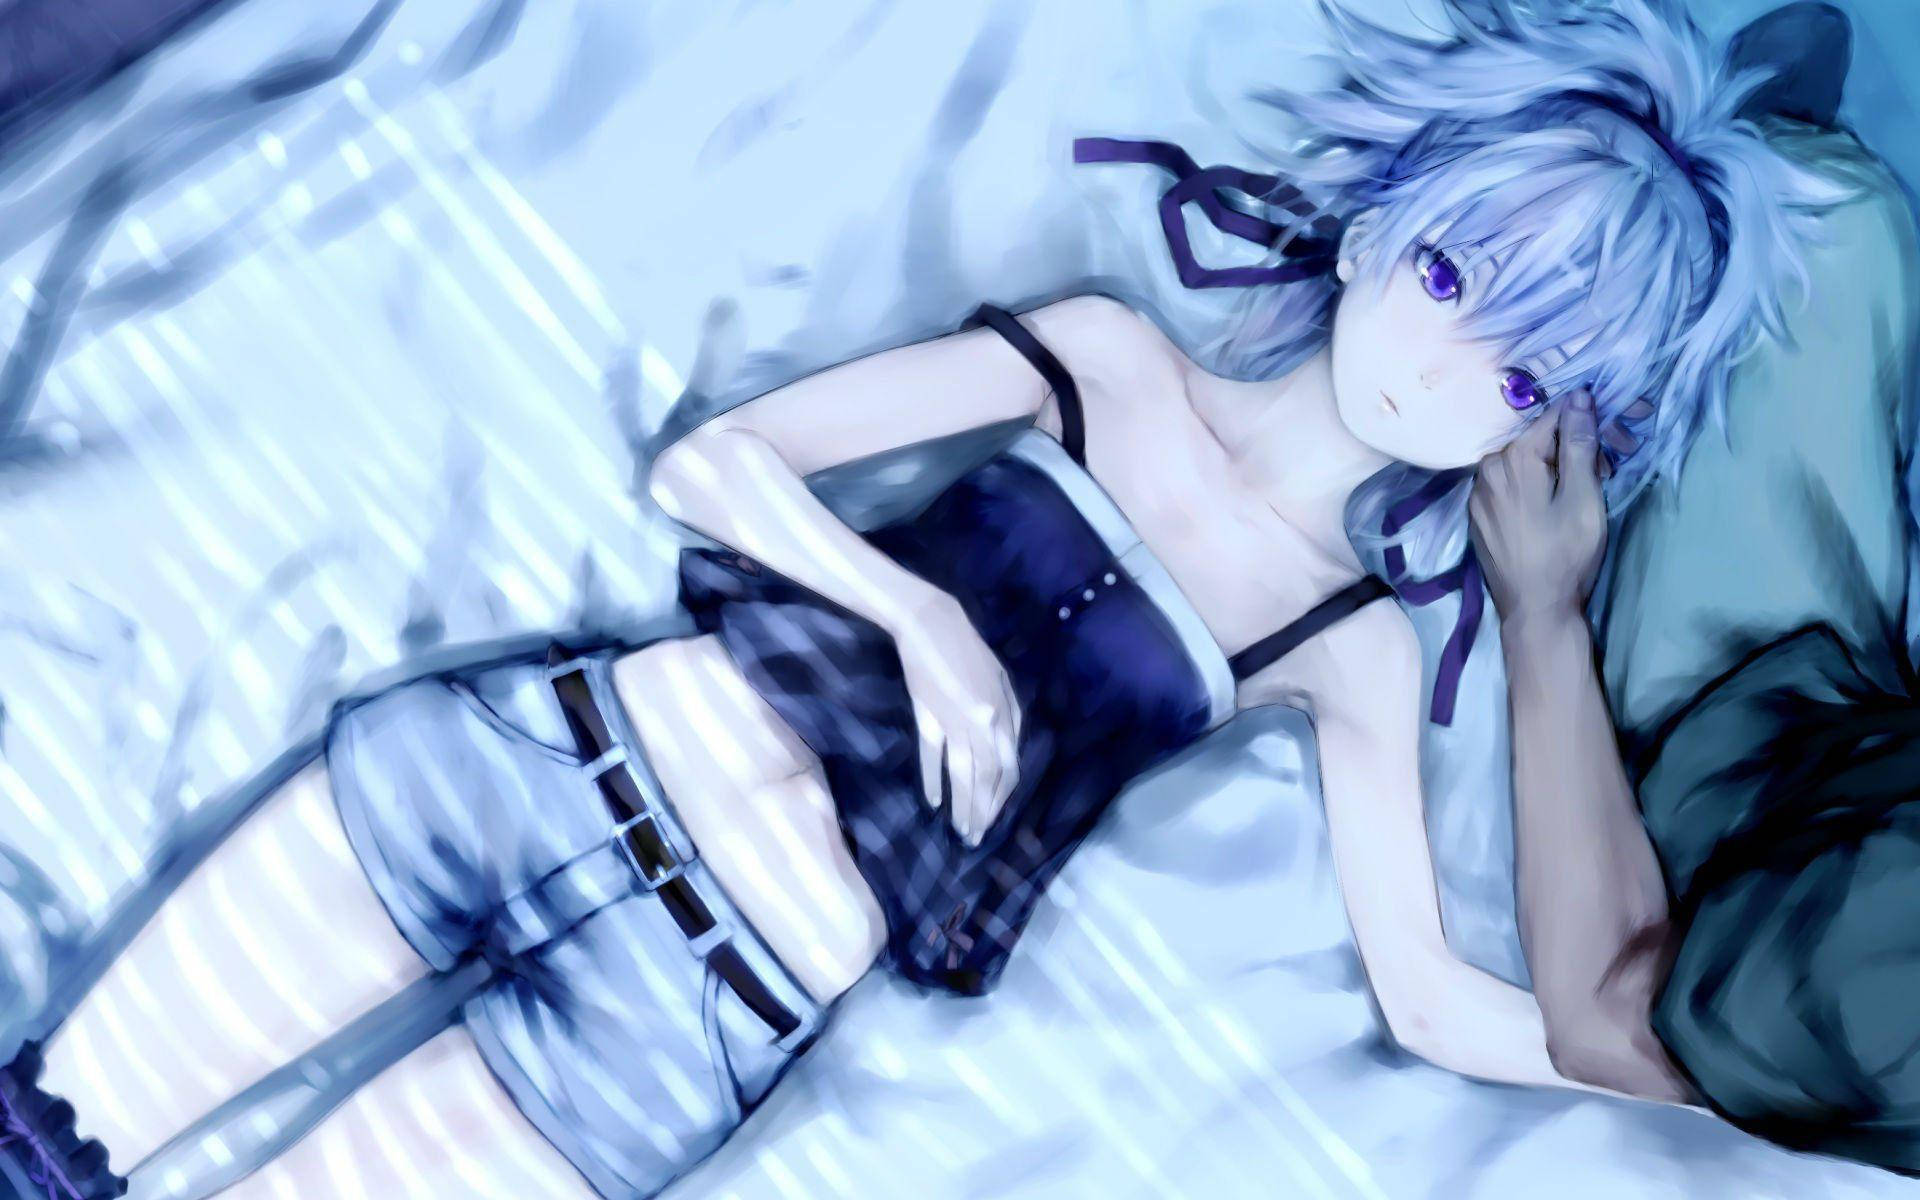 Anime Girl Lyong On Bed Background